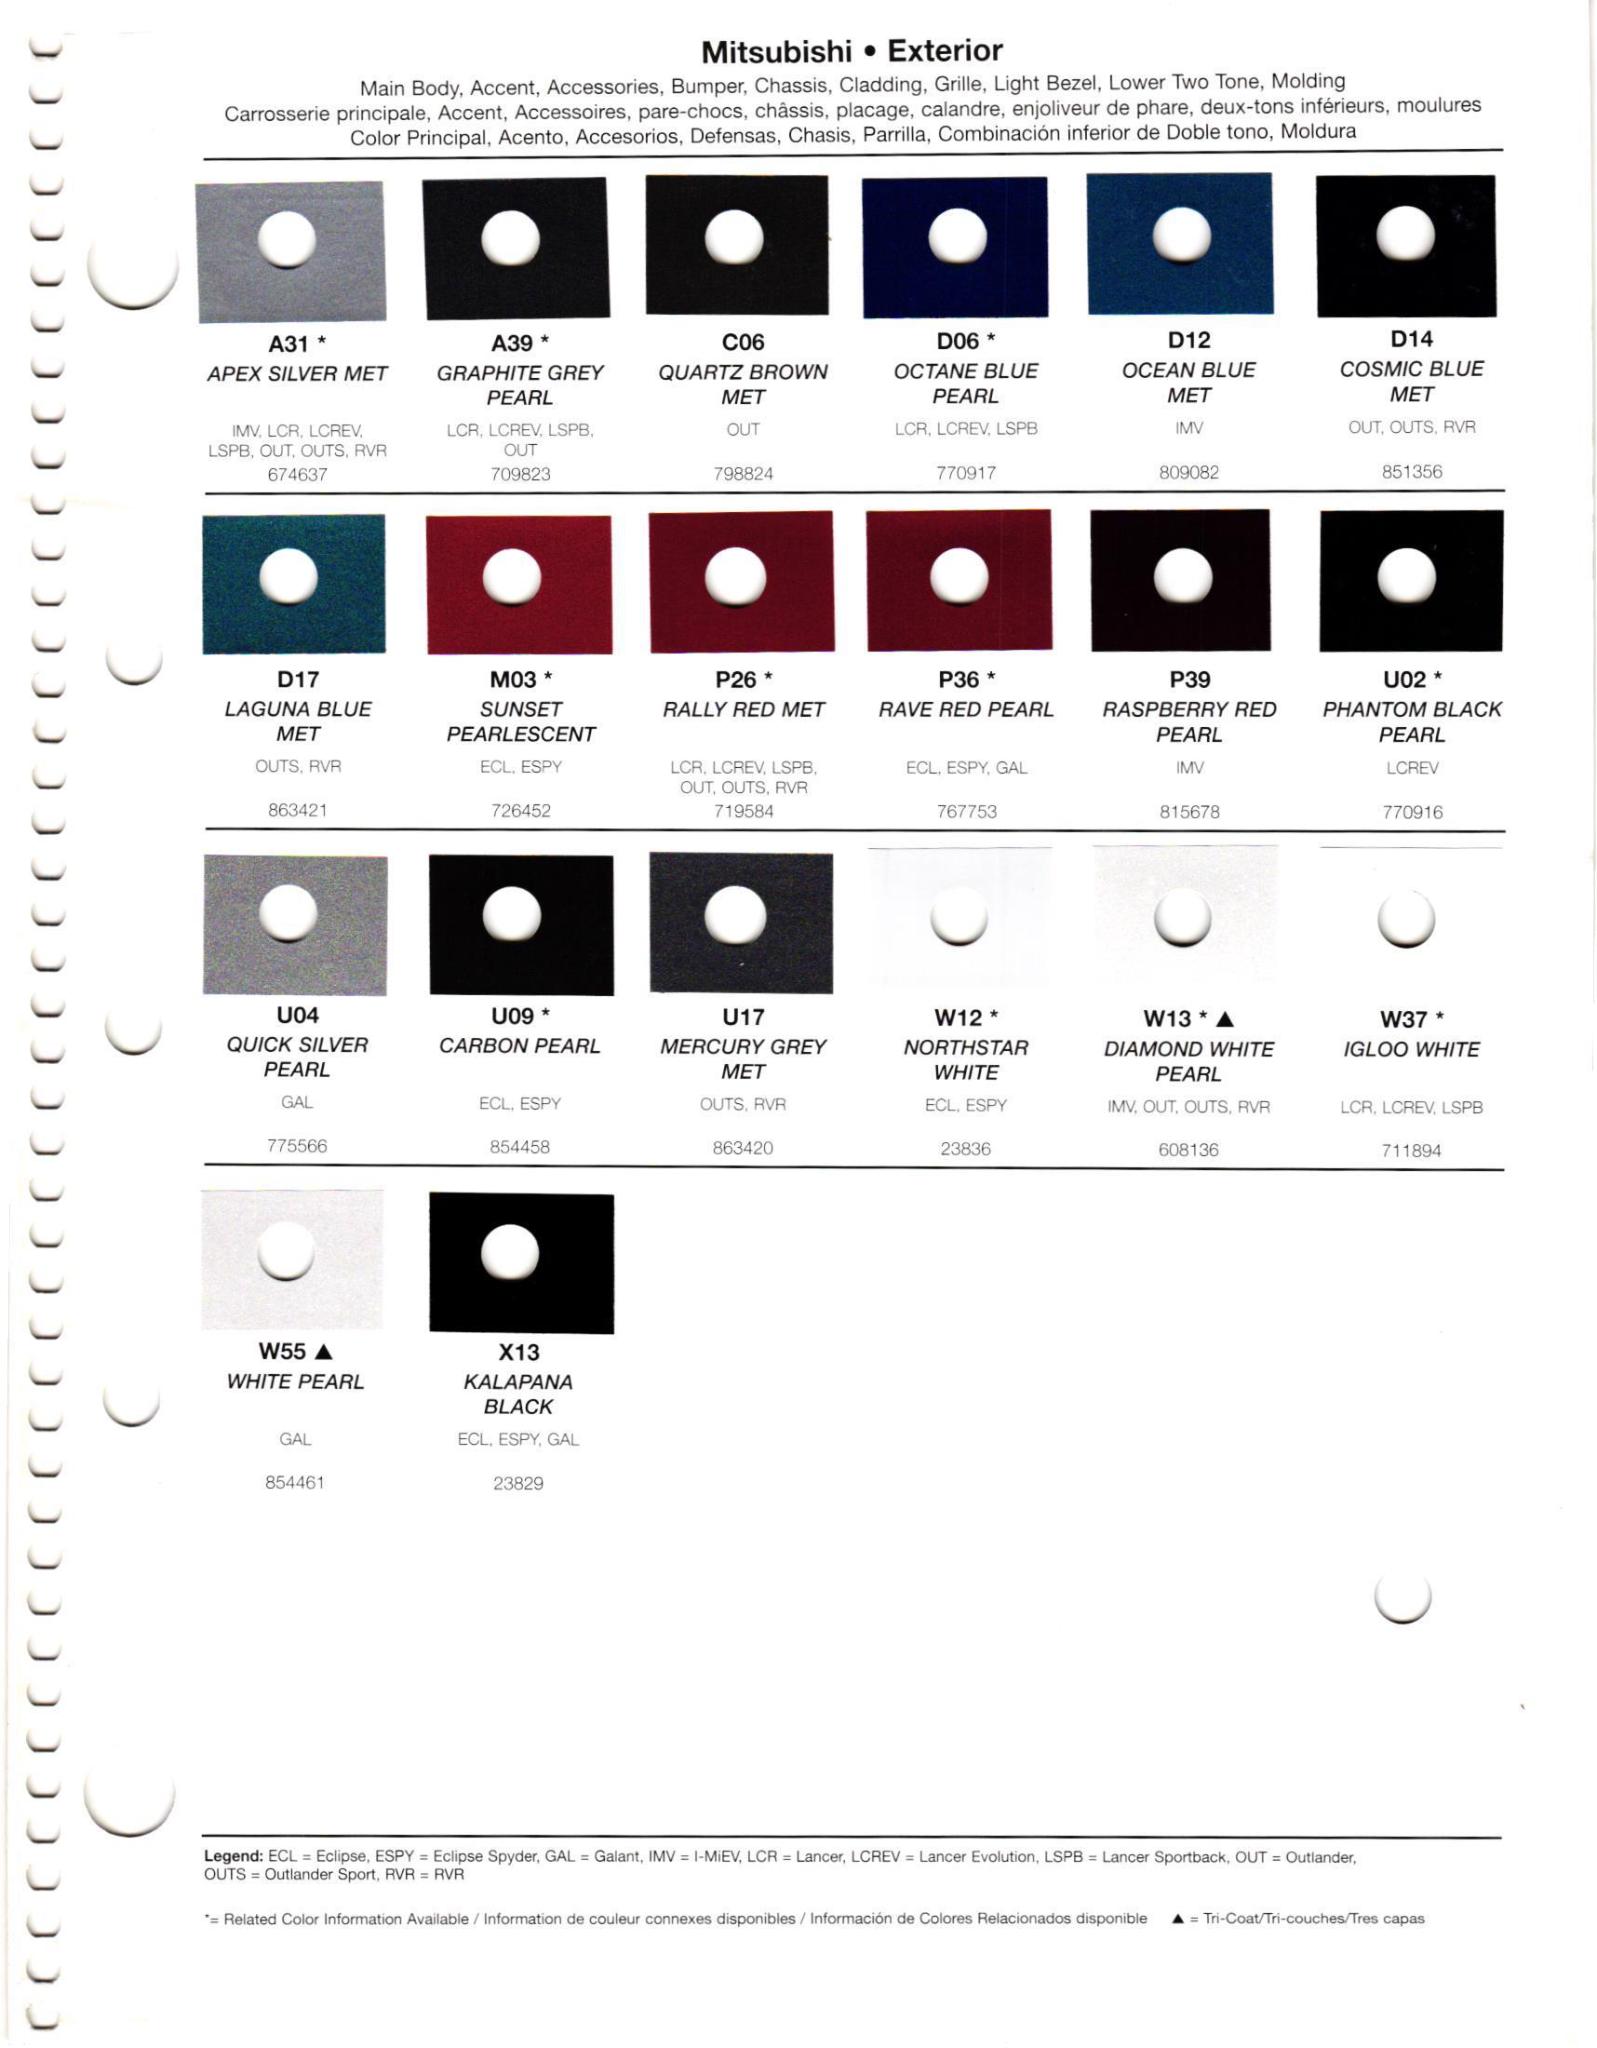 a paint code chart showing 2012 mitsubishi vehicles paint codes color names and swatches.